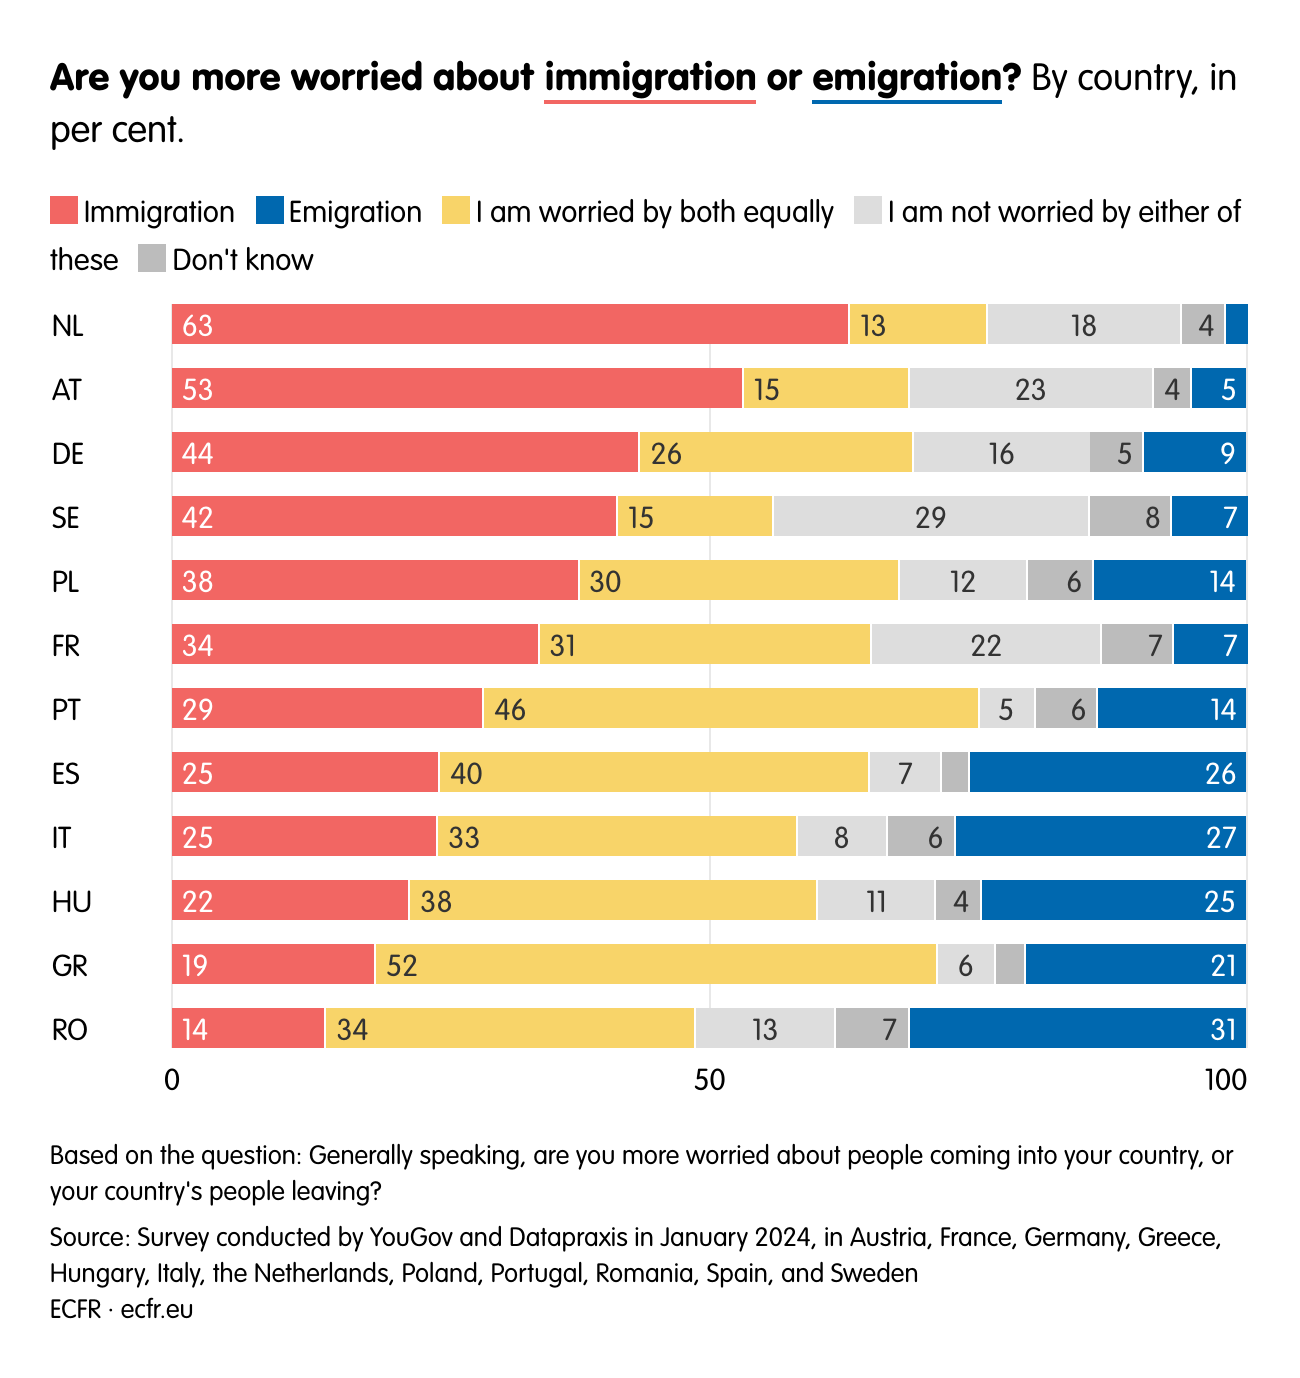 Are you more worried about immigration or emigration?